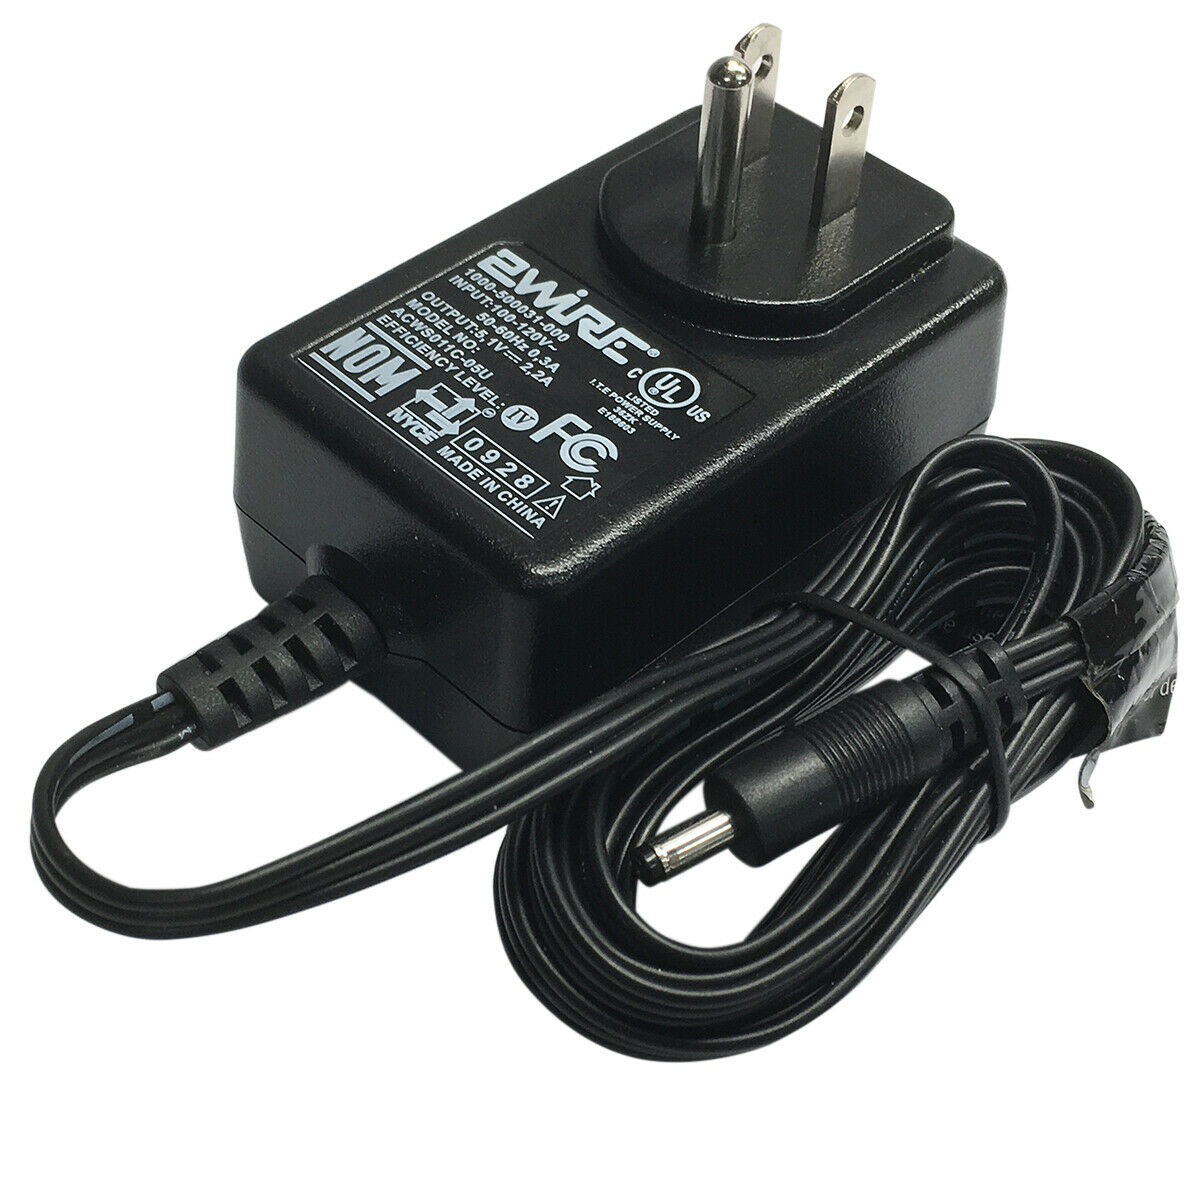 New 5.1V 2.2A 2Wire ACWS011C-05U Power Supply AC ADAPTER for AT&T Modem